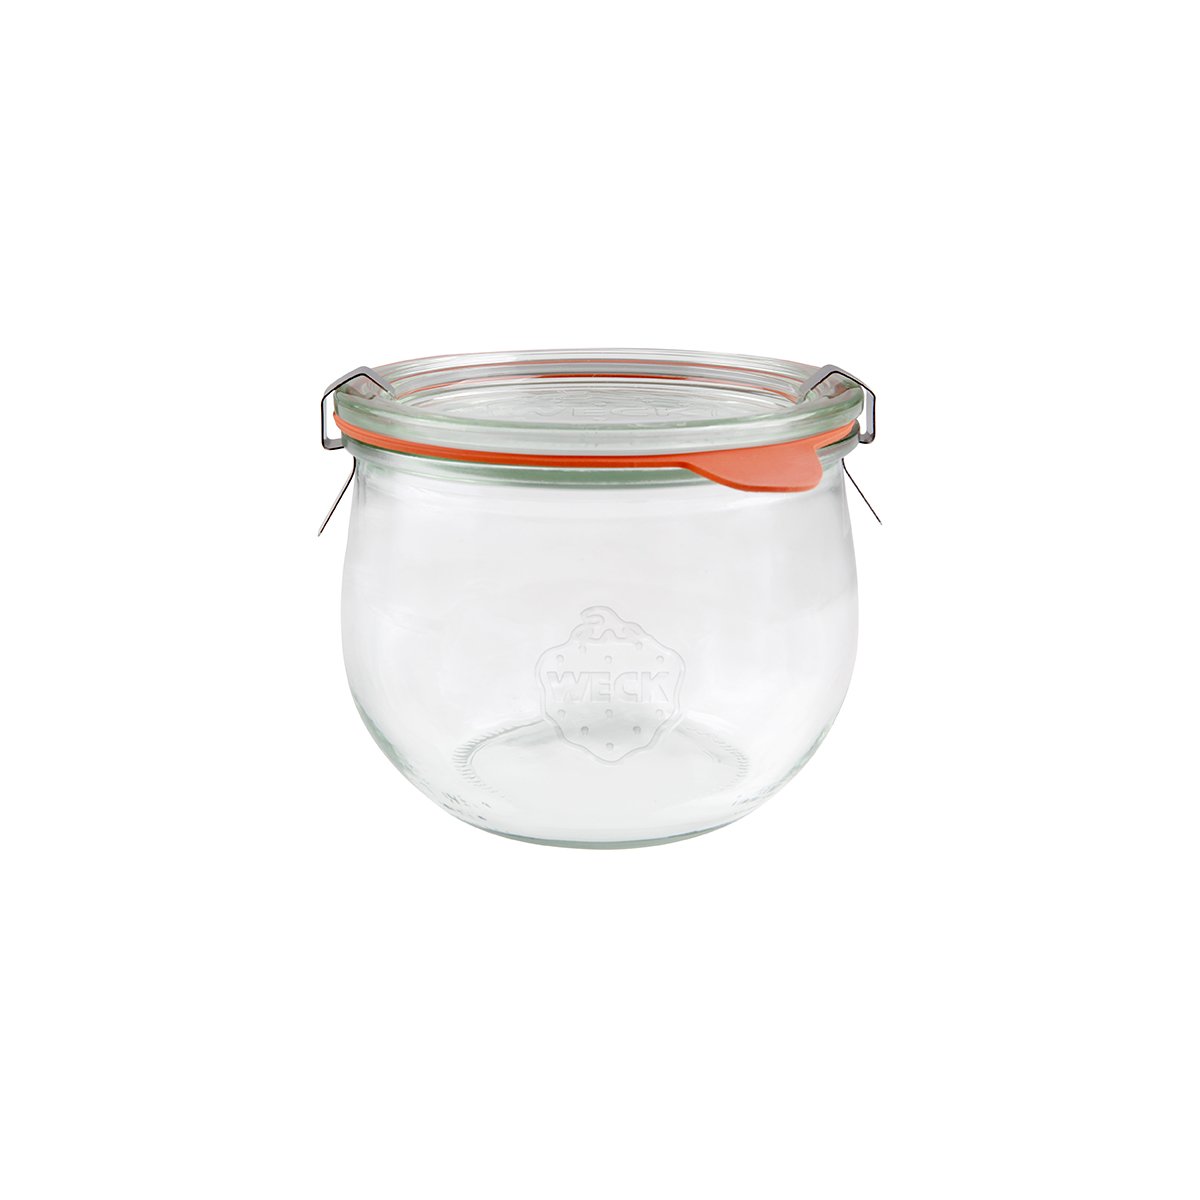 9982378 Weck Complete Tulip Jar with Lid 100x85mm / 580ml Tomkin Australia Hospitality Supplies